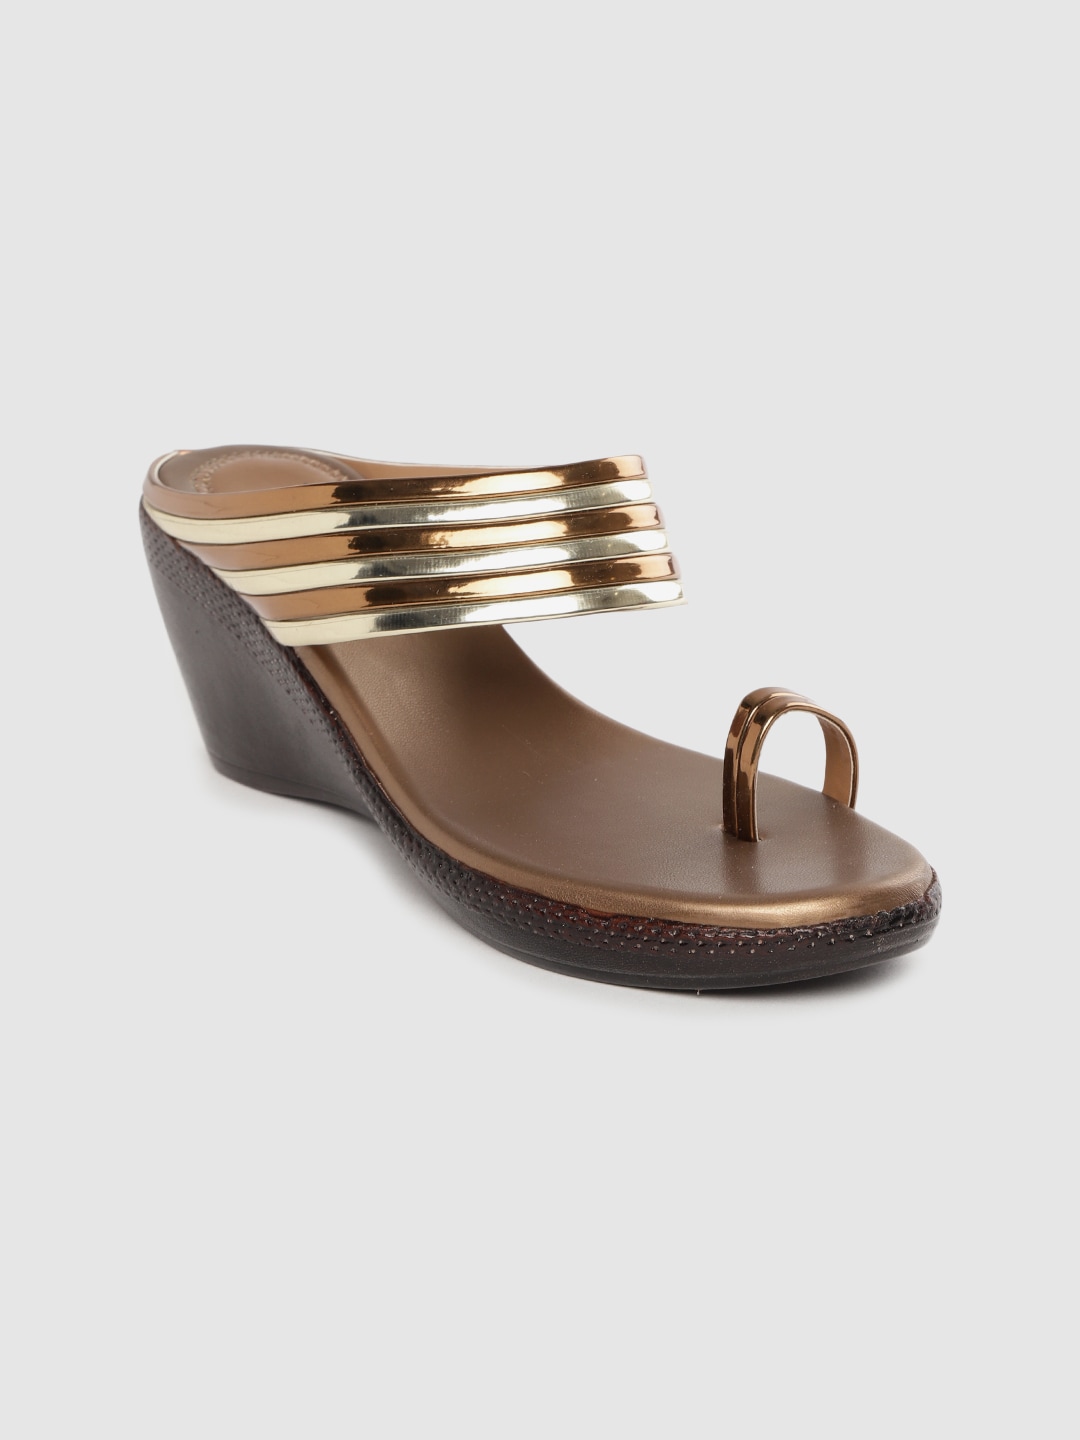 TRASE Women Bronze Toned & Gold-Toned Striped One Toe Heels Price in India